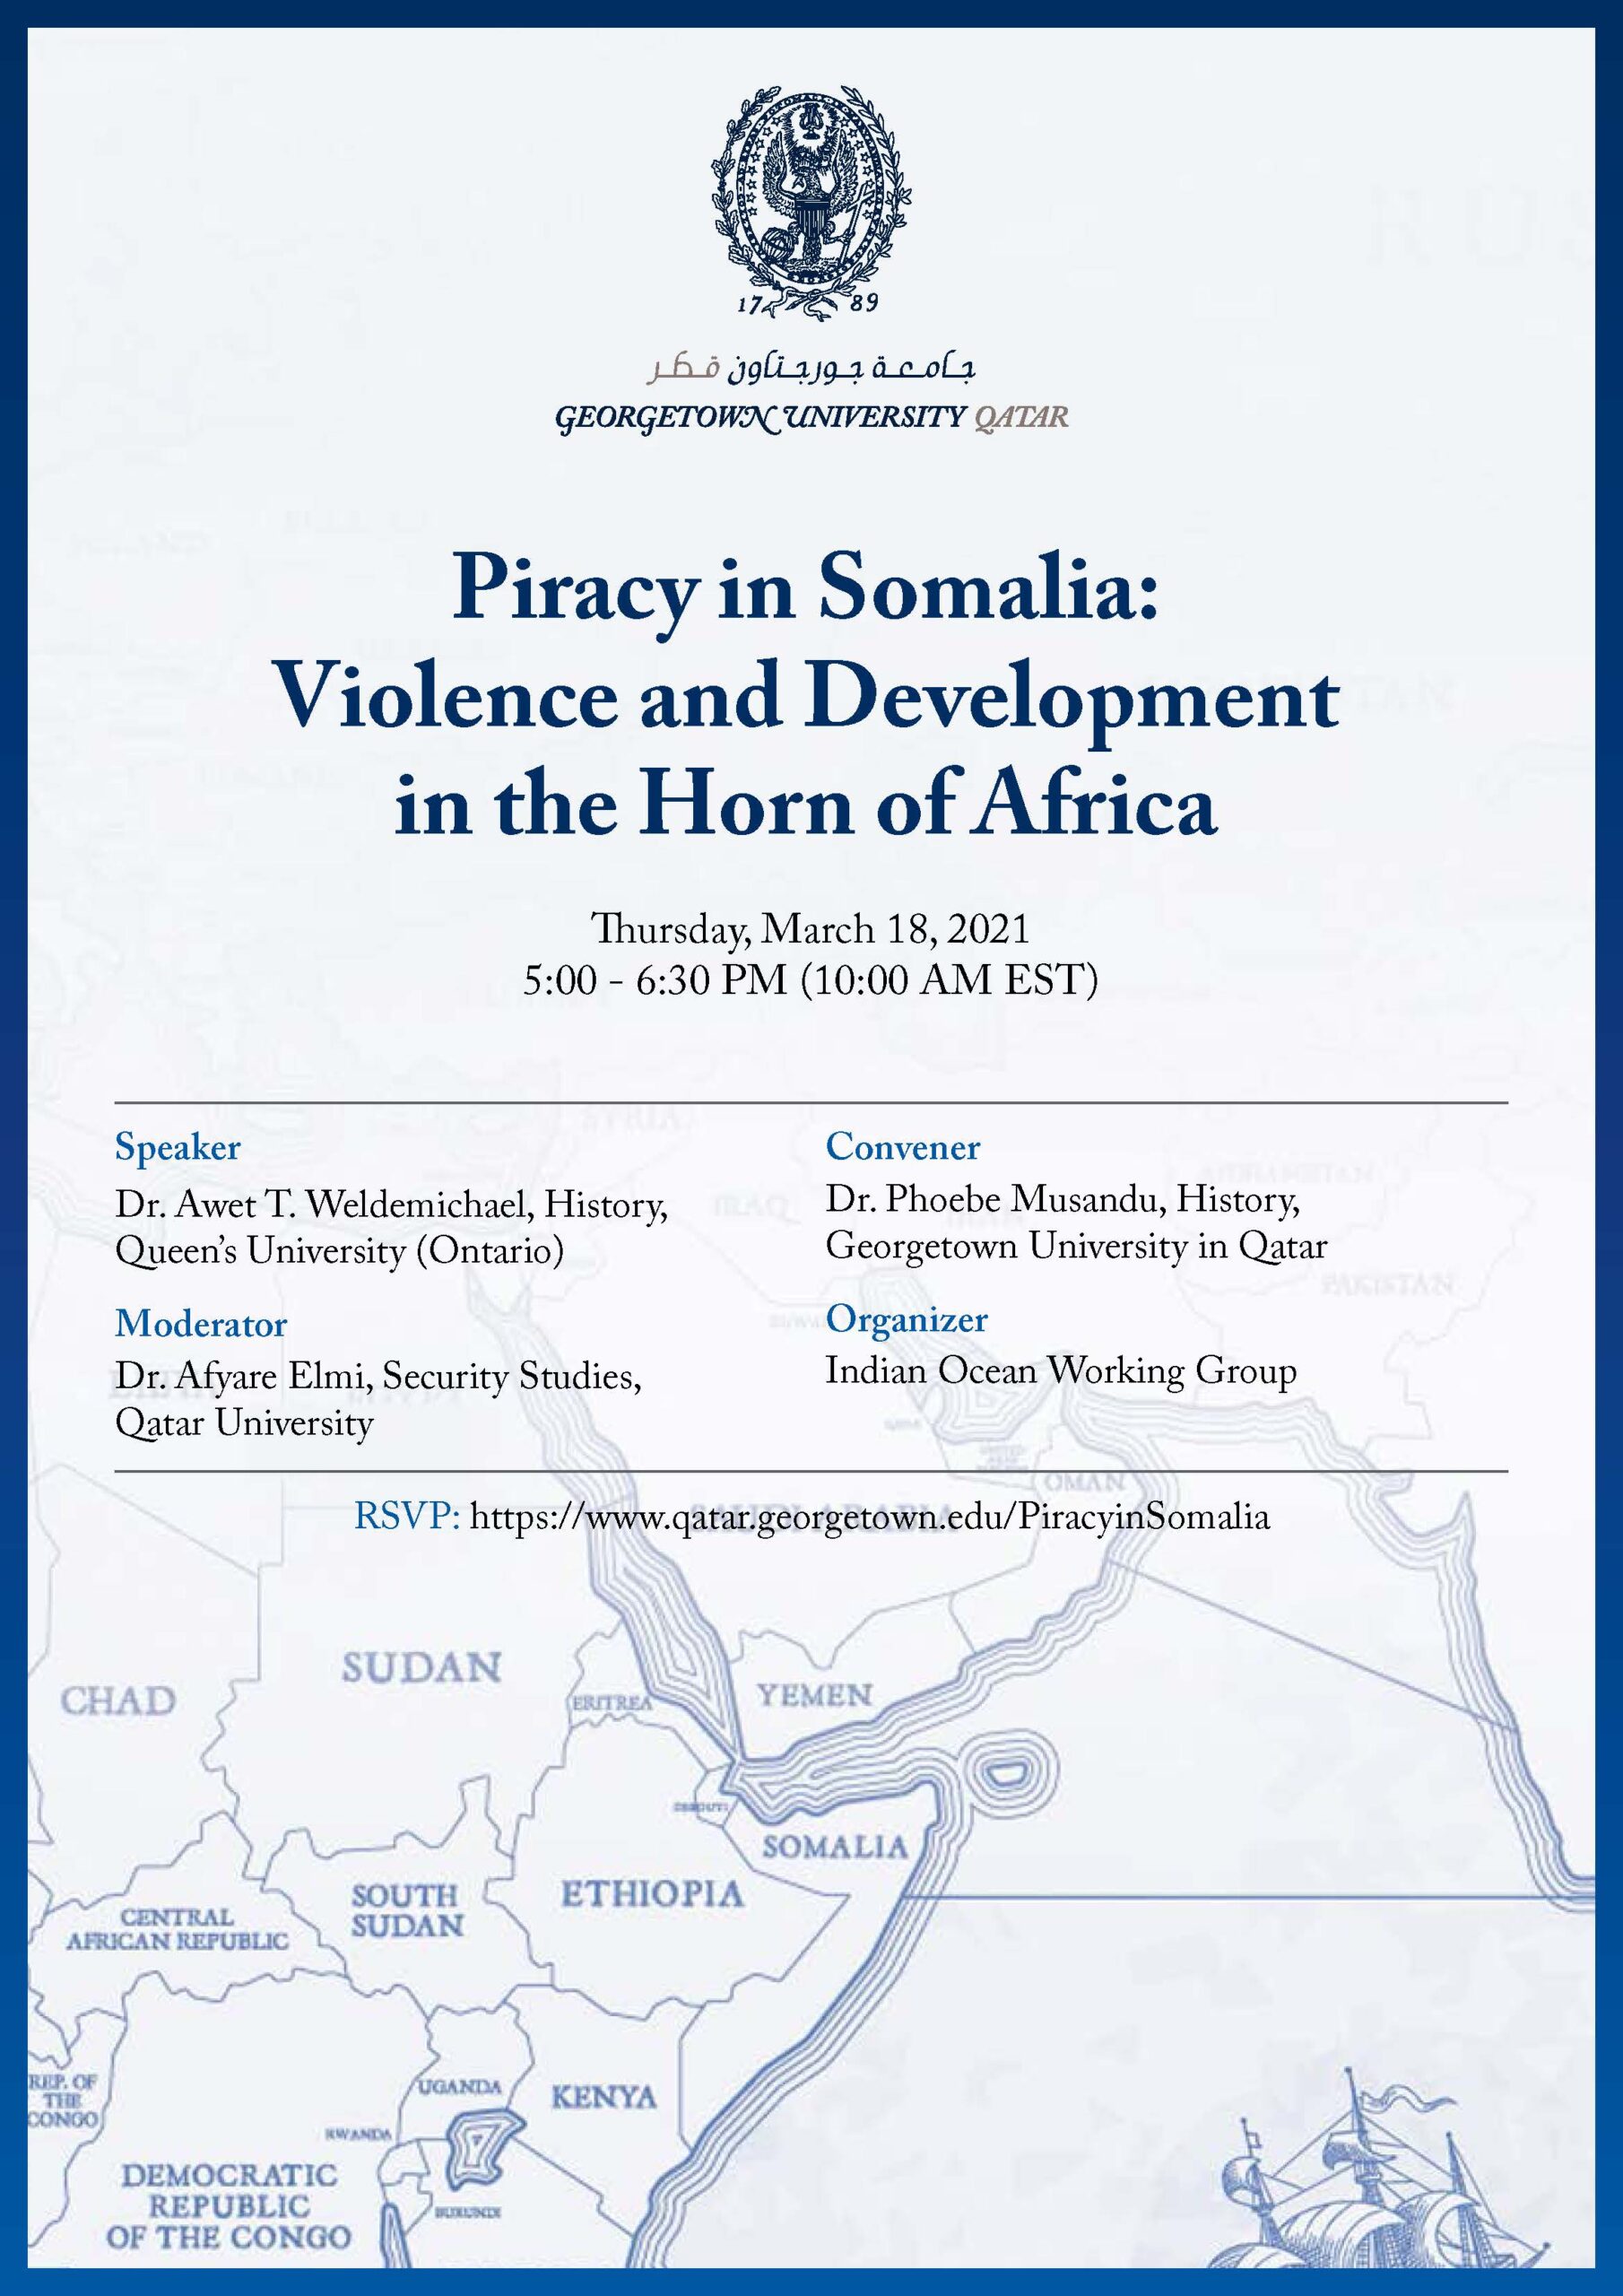 Poster for Piracy in Somalia event